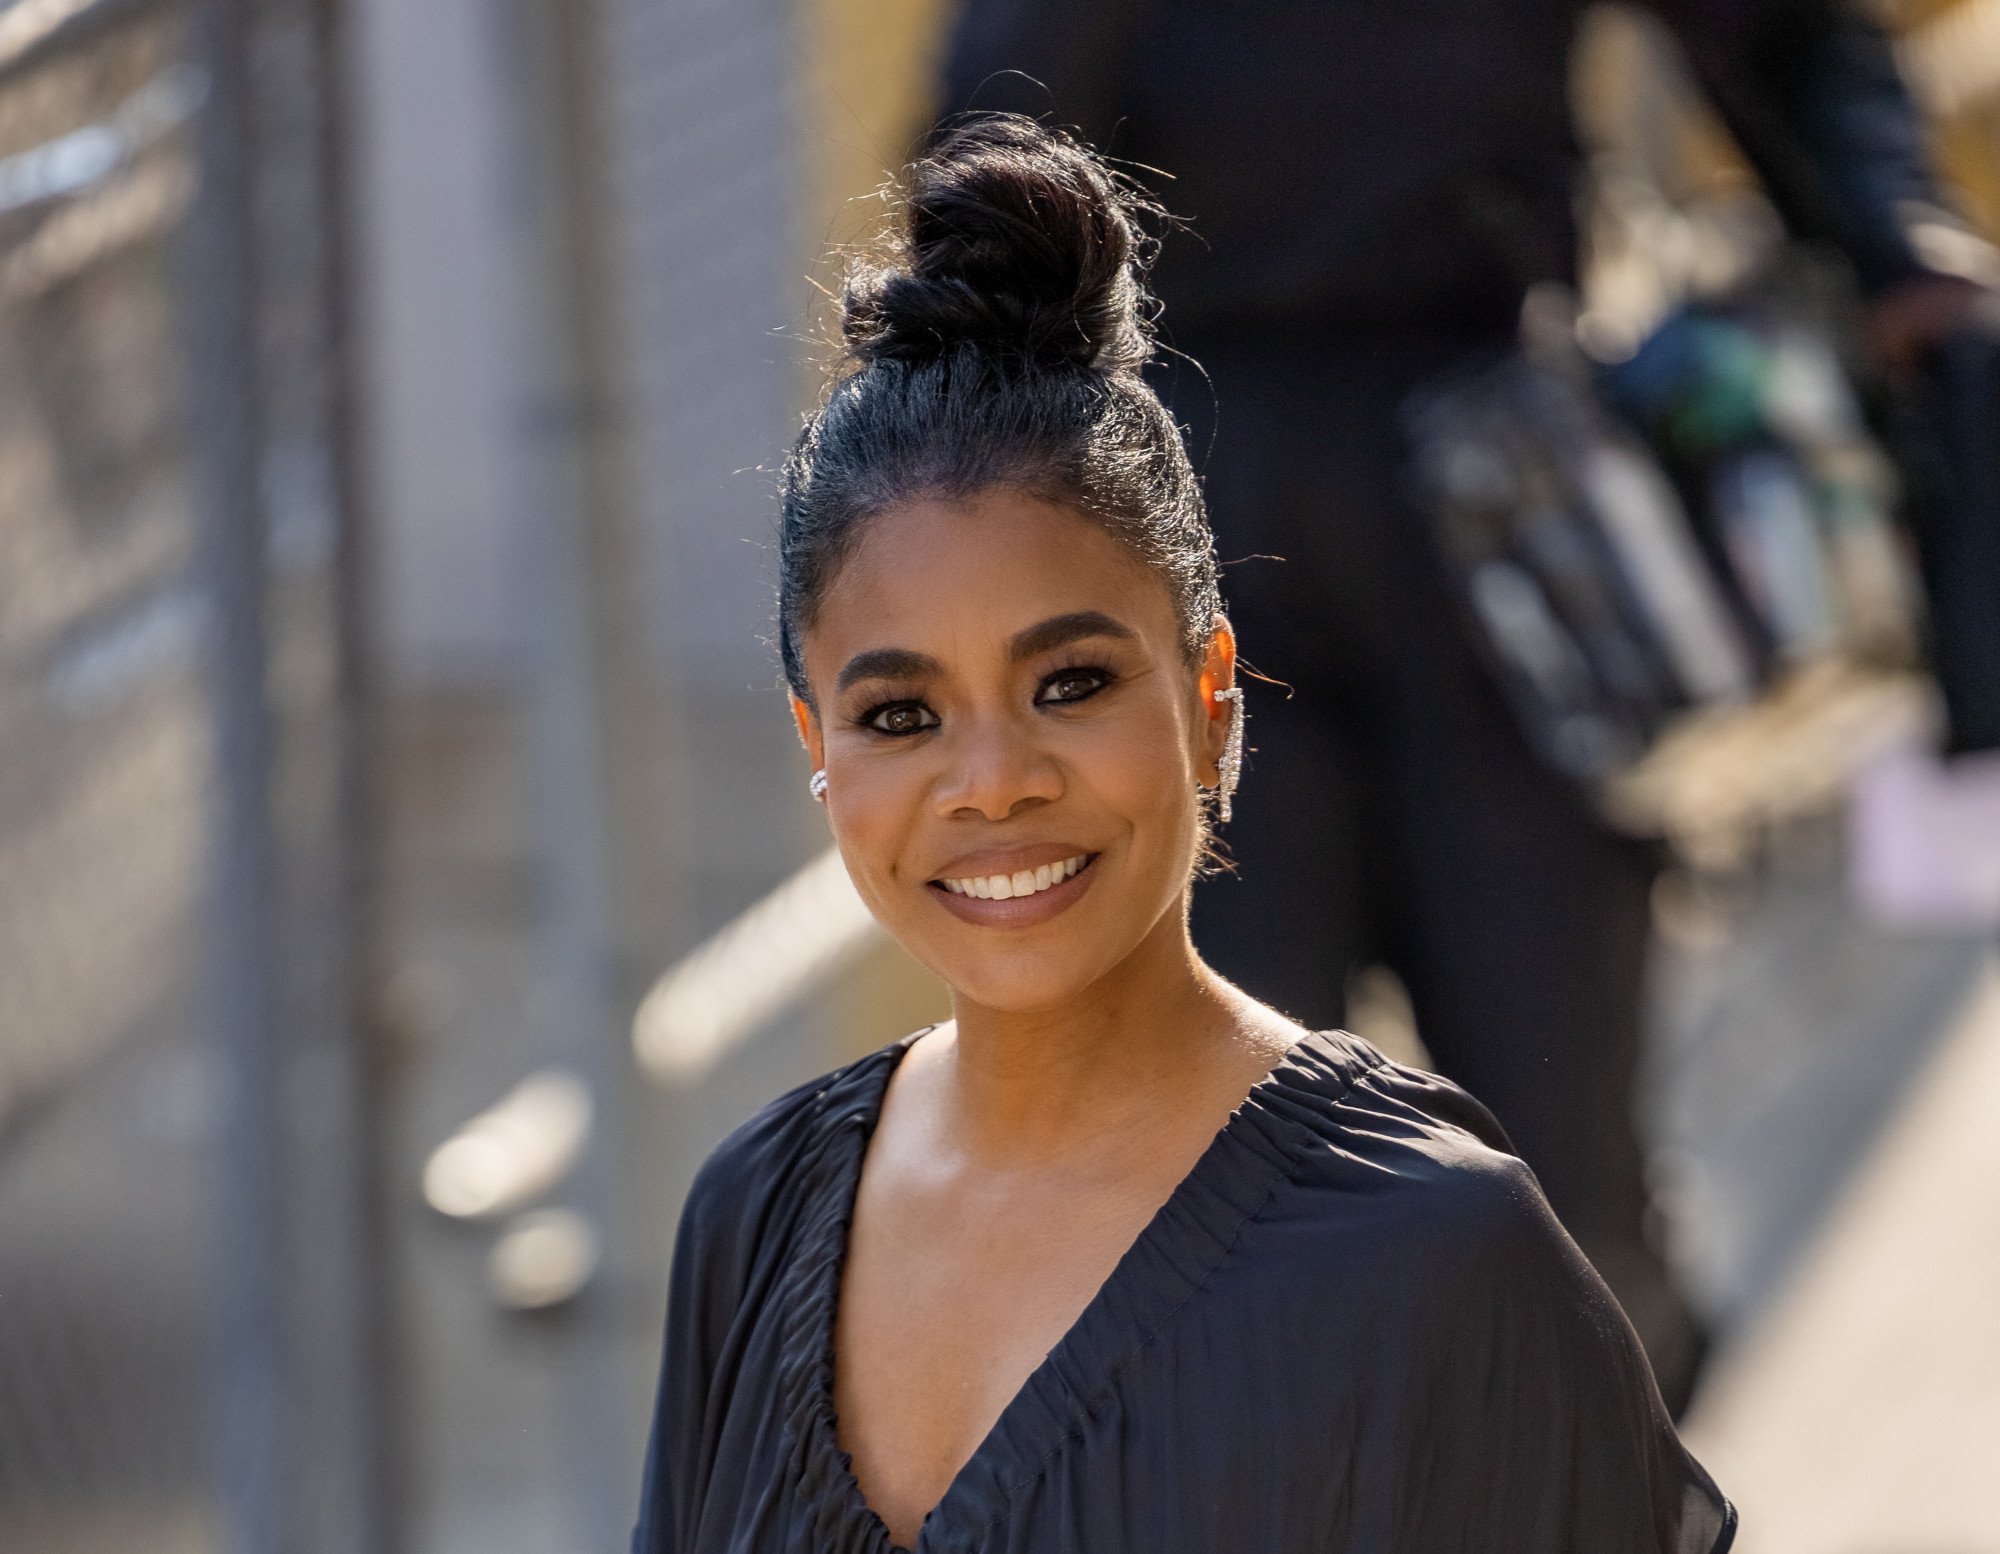 'Nine Perfect Strangers' cast member Regina Hall. She's walking outside and wearing a black outfit with a V-shaped neckline. Her hair is in a bun and she's smiling at the camera. .